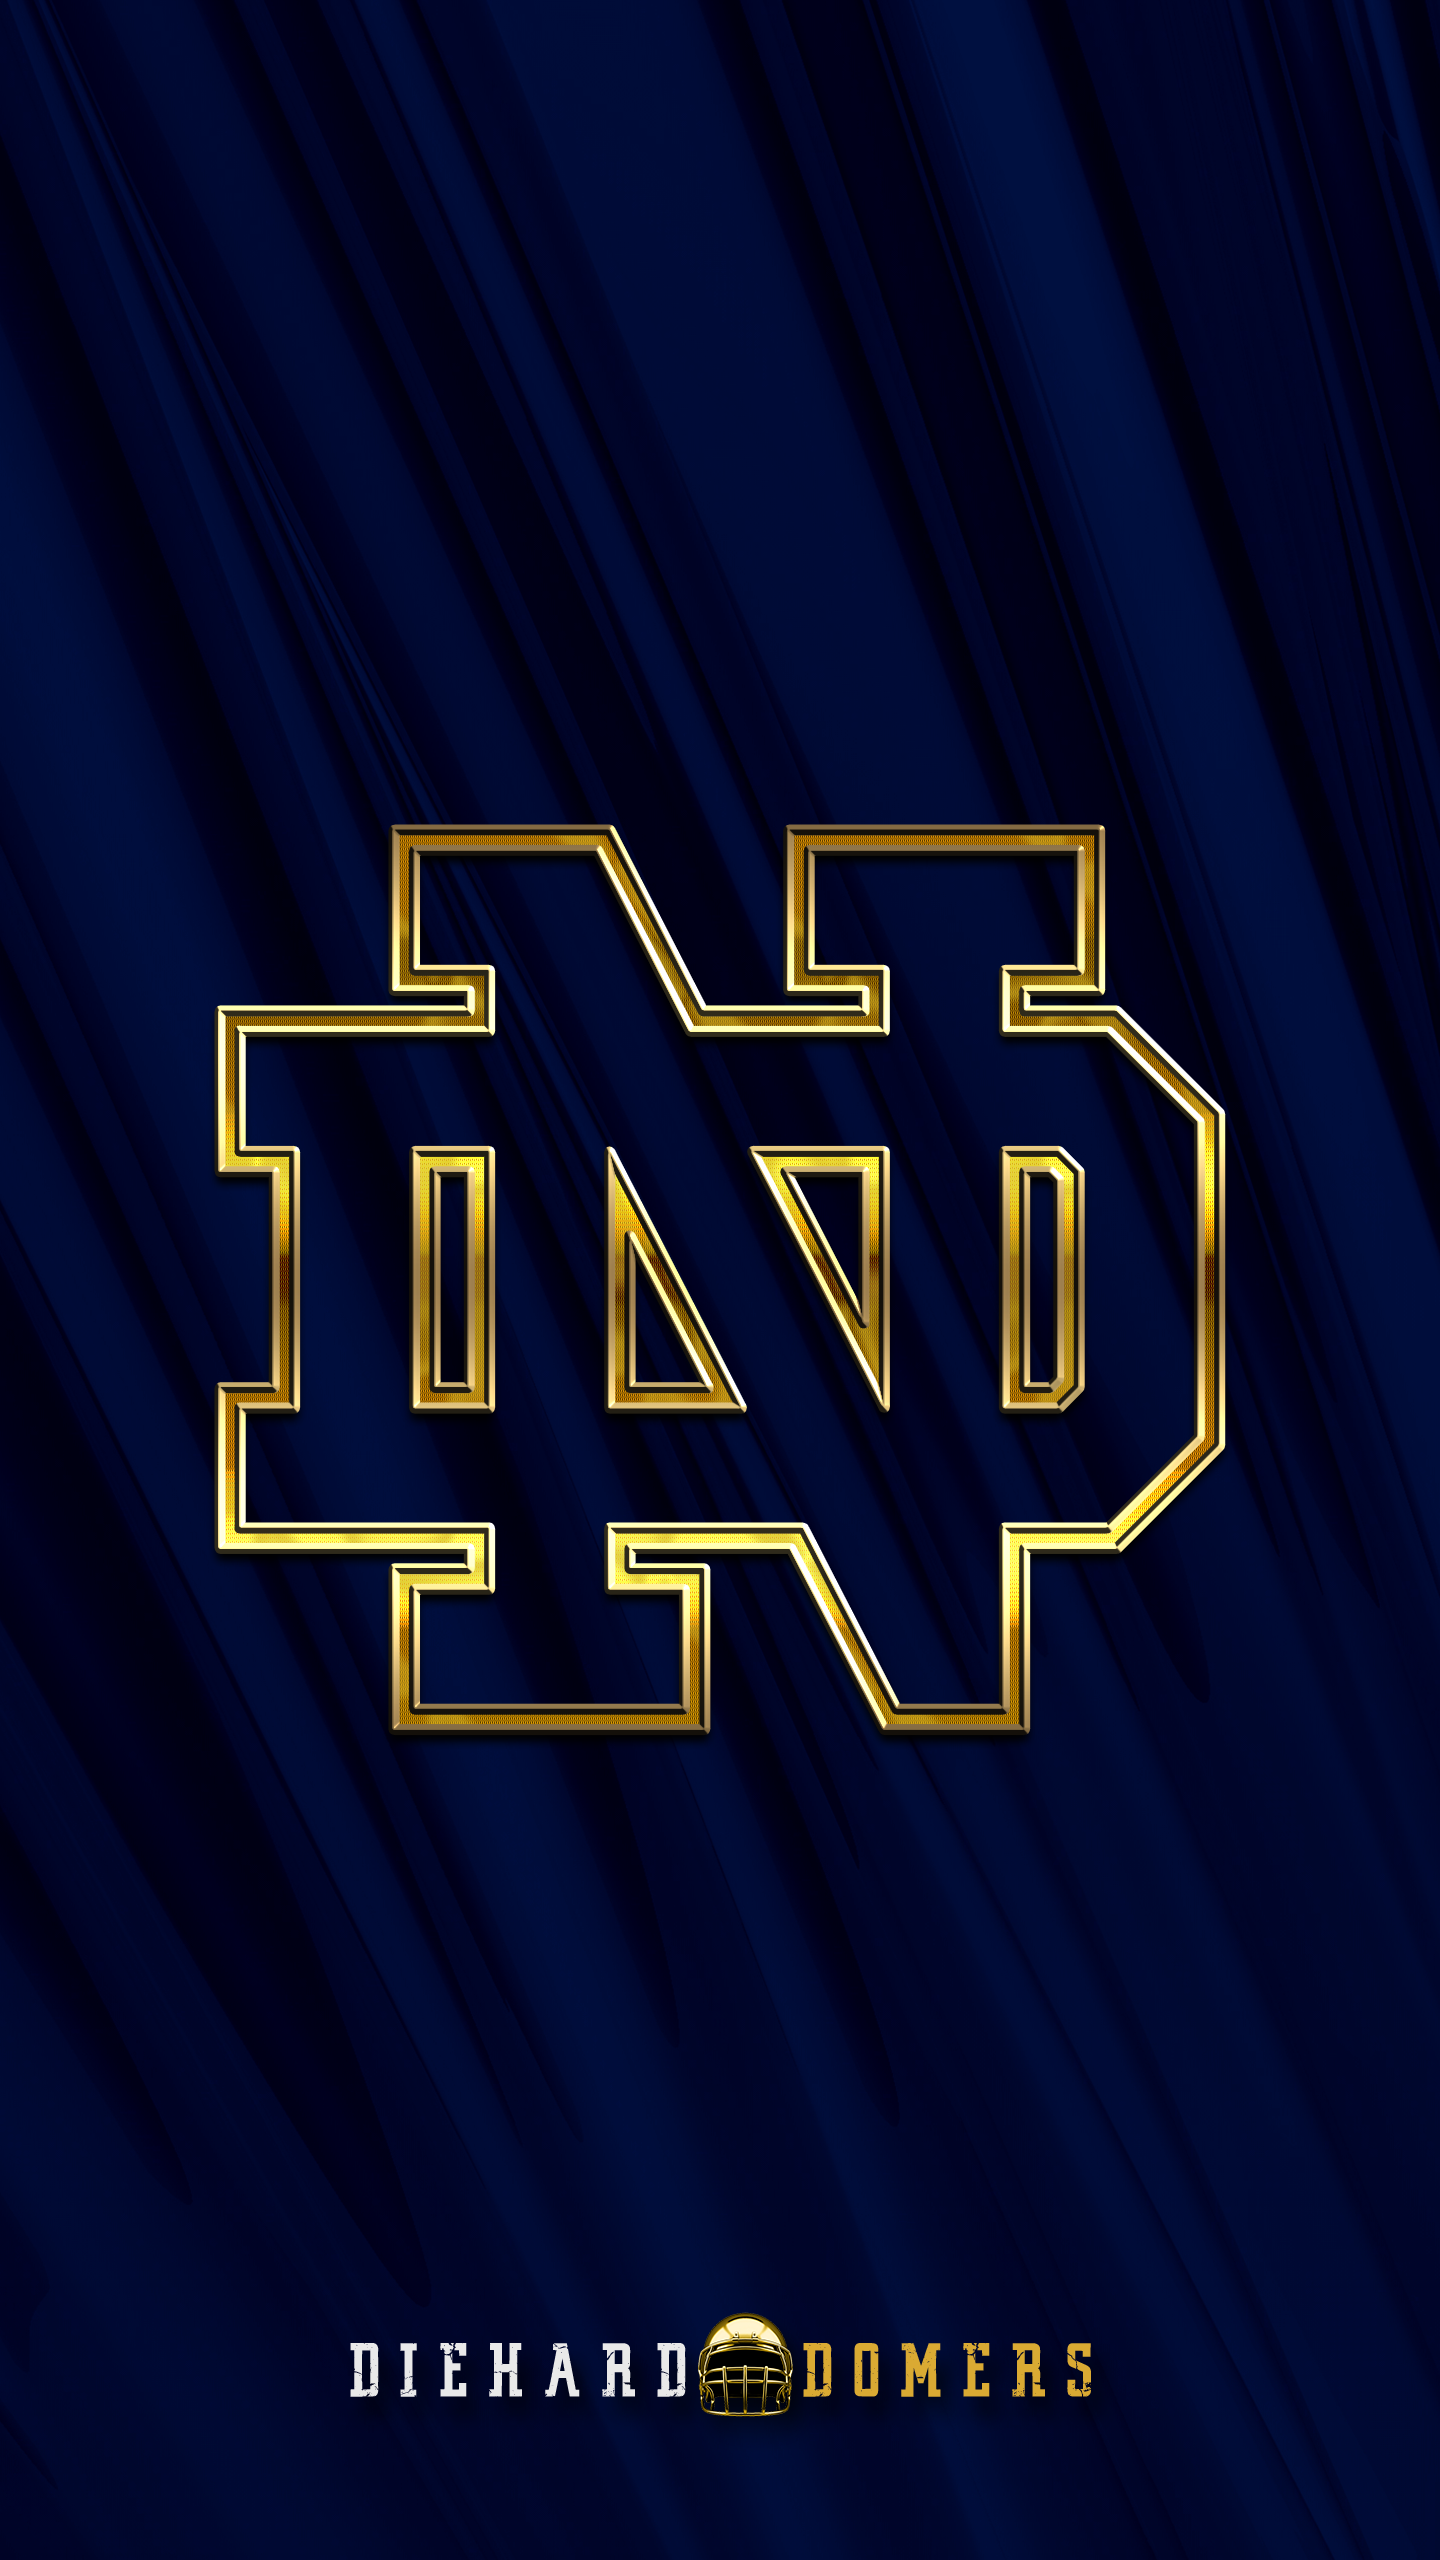 Notre Dame Wallpapers